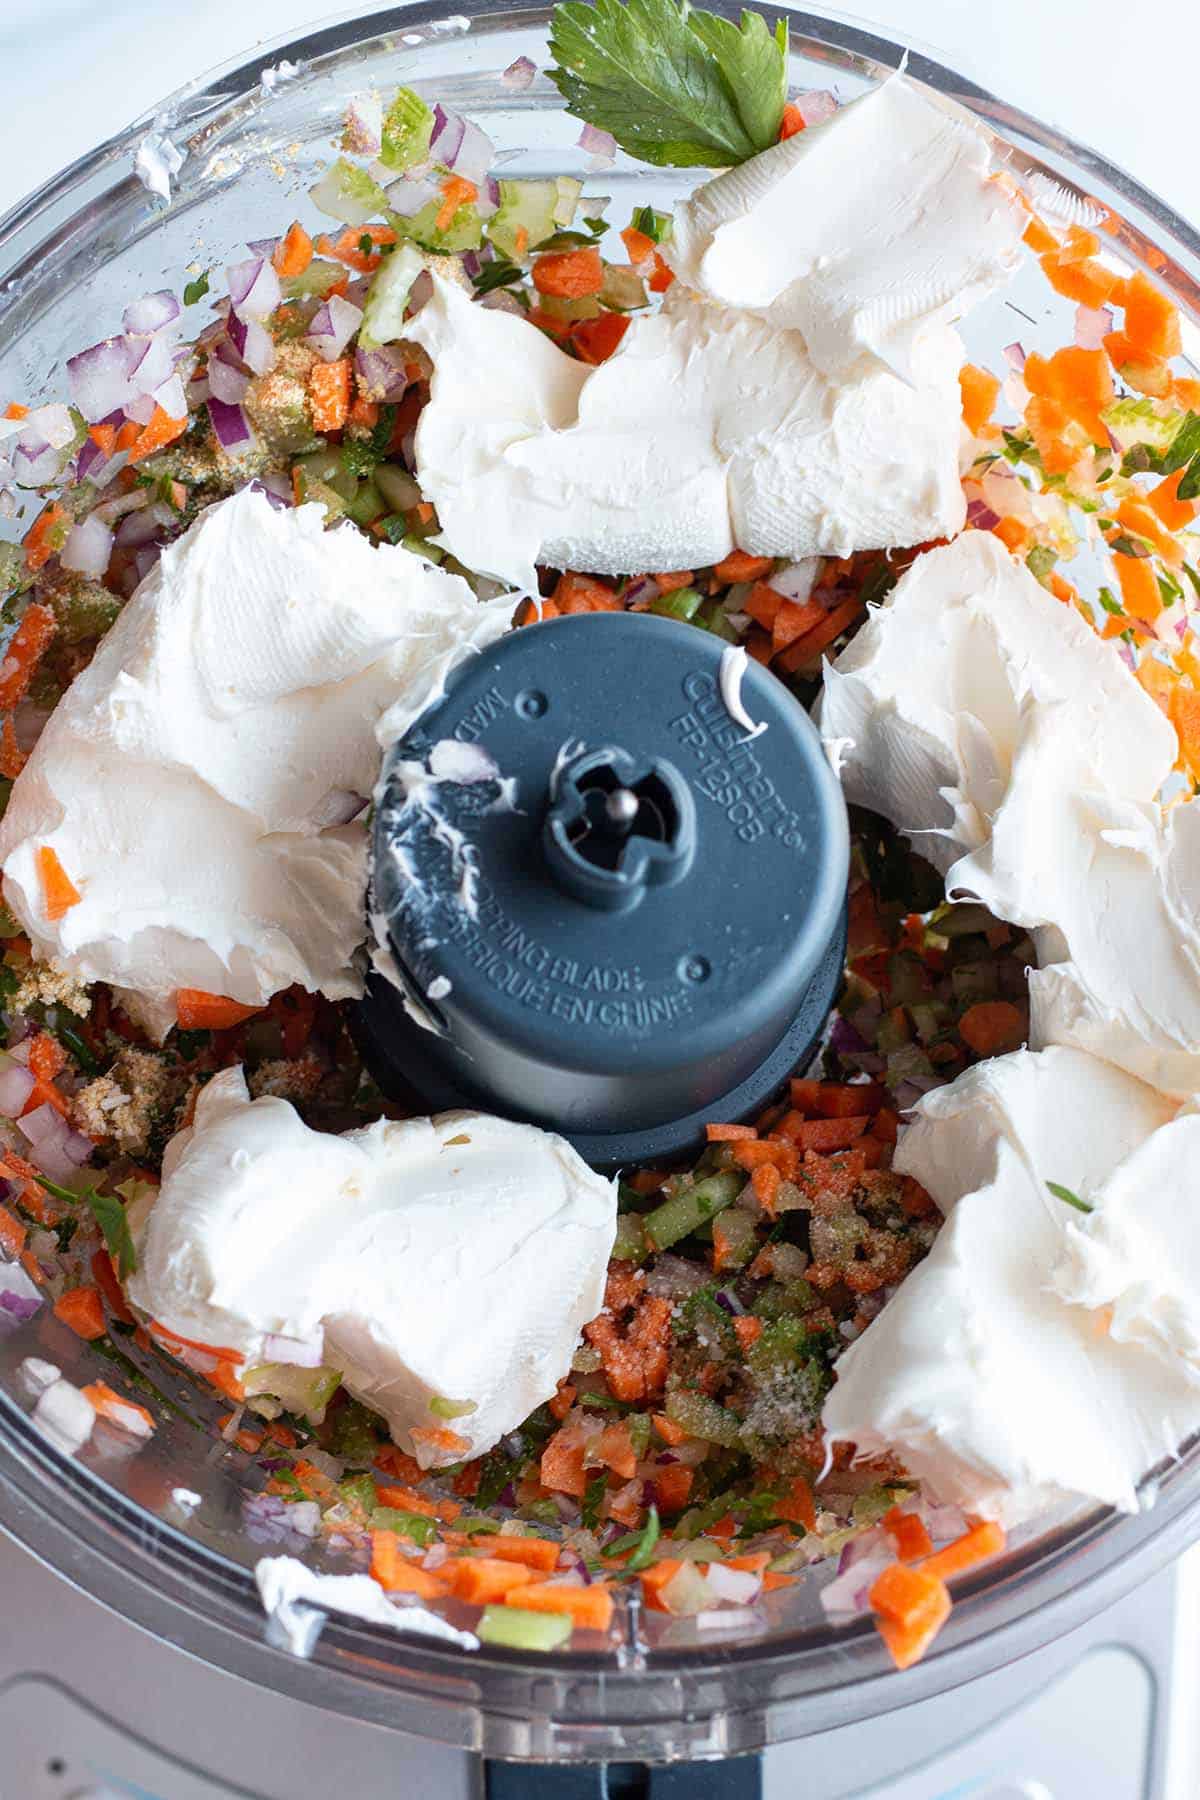 A food processor with finely diced veggies and clumps of cream cheese.